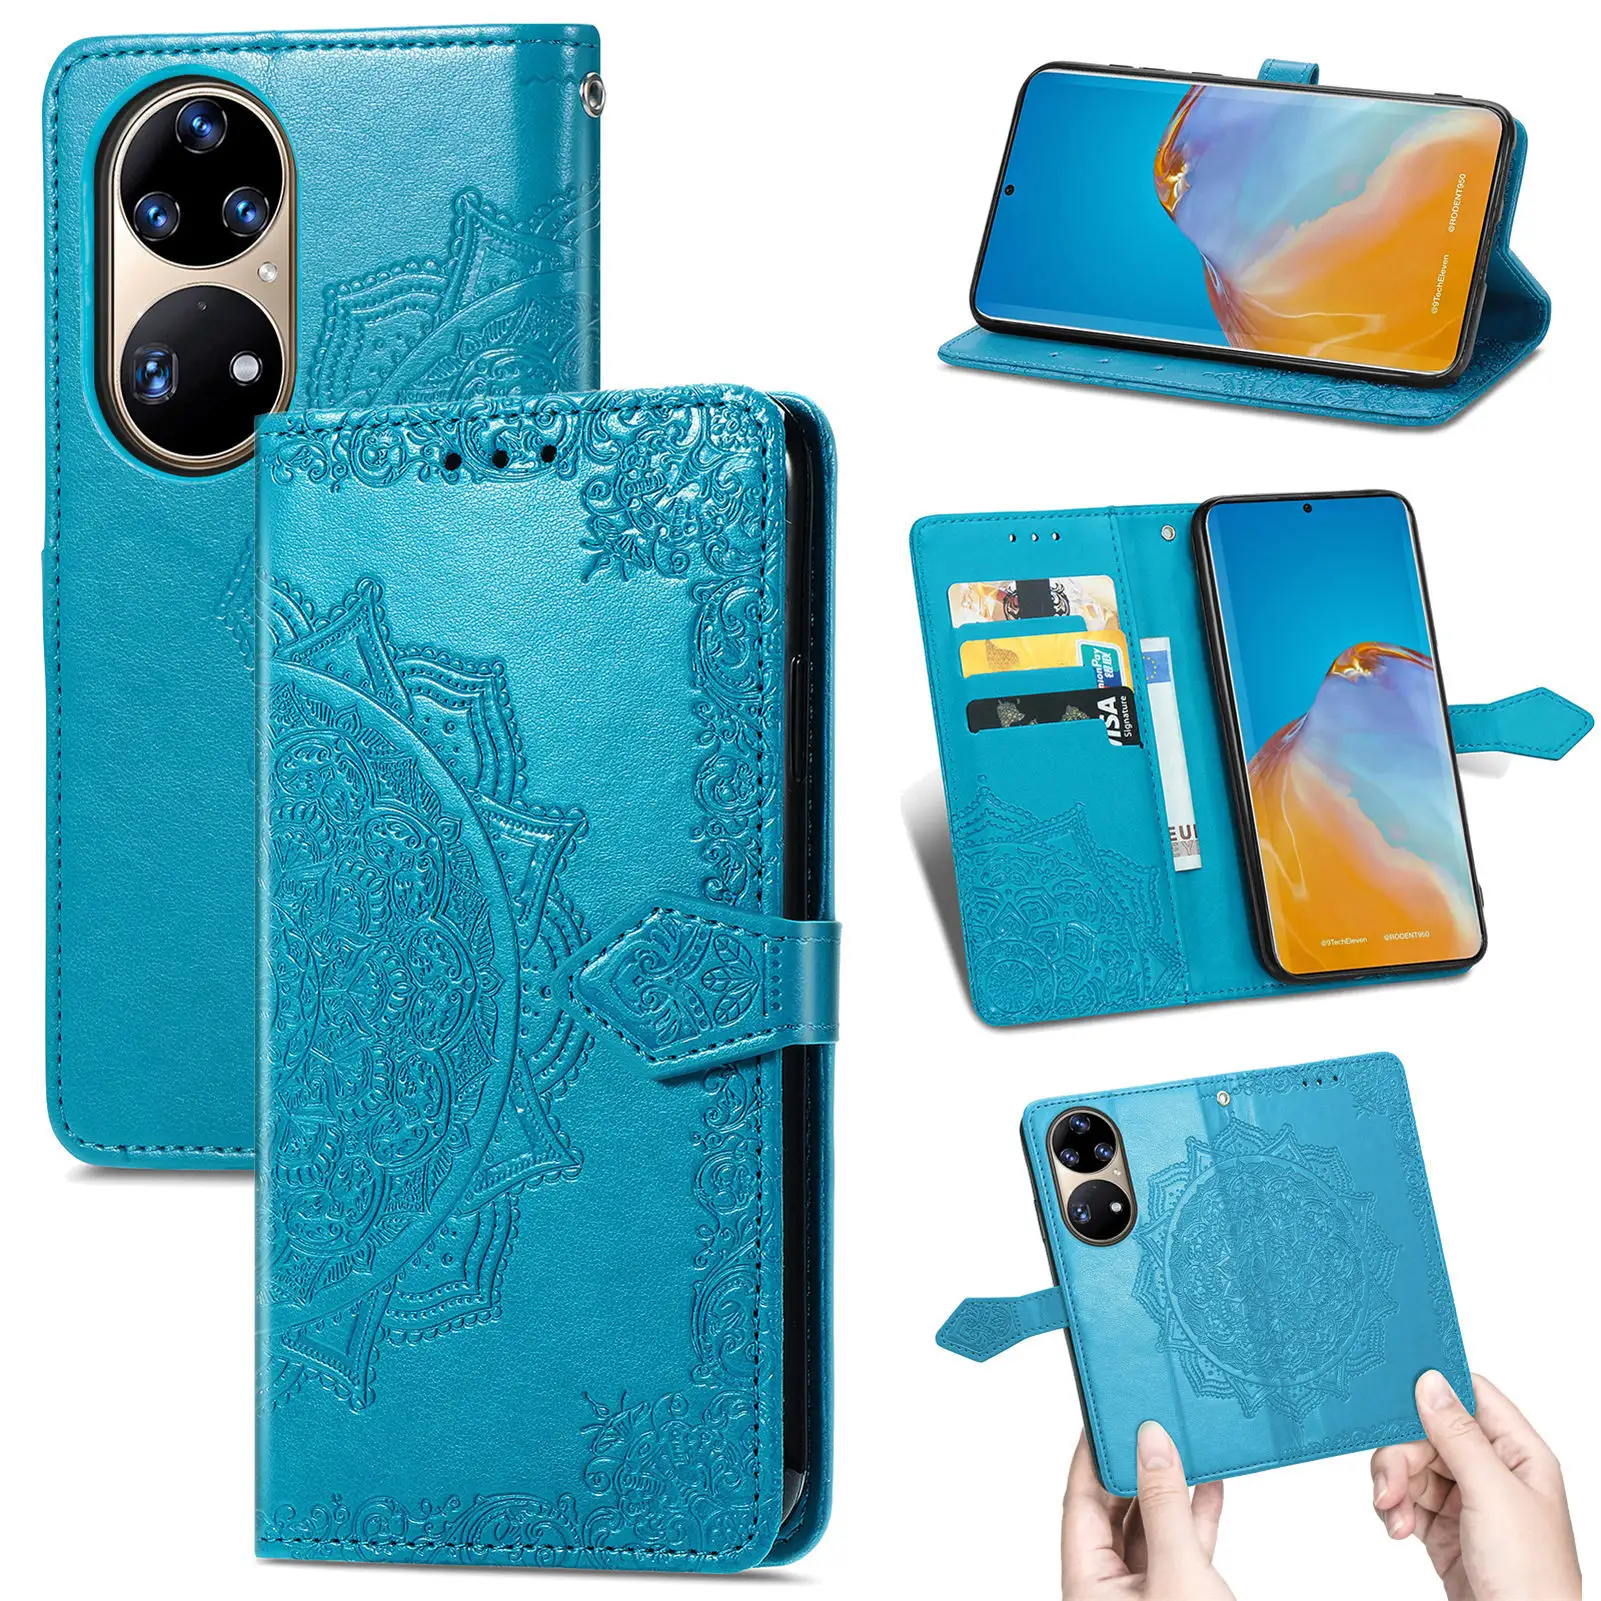 Jmax Hot Sell Mandala Printing Wallet Magnetic Flip PU Leather cell Phone Case Cover For HUAWEI P 20 30 40 50 Pro Lite